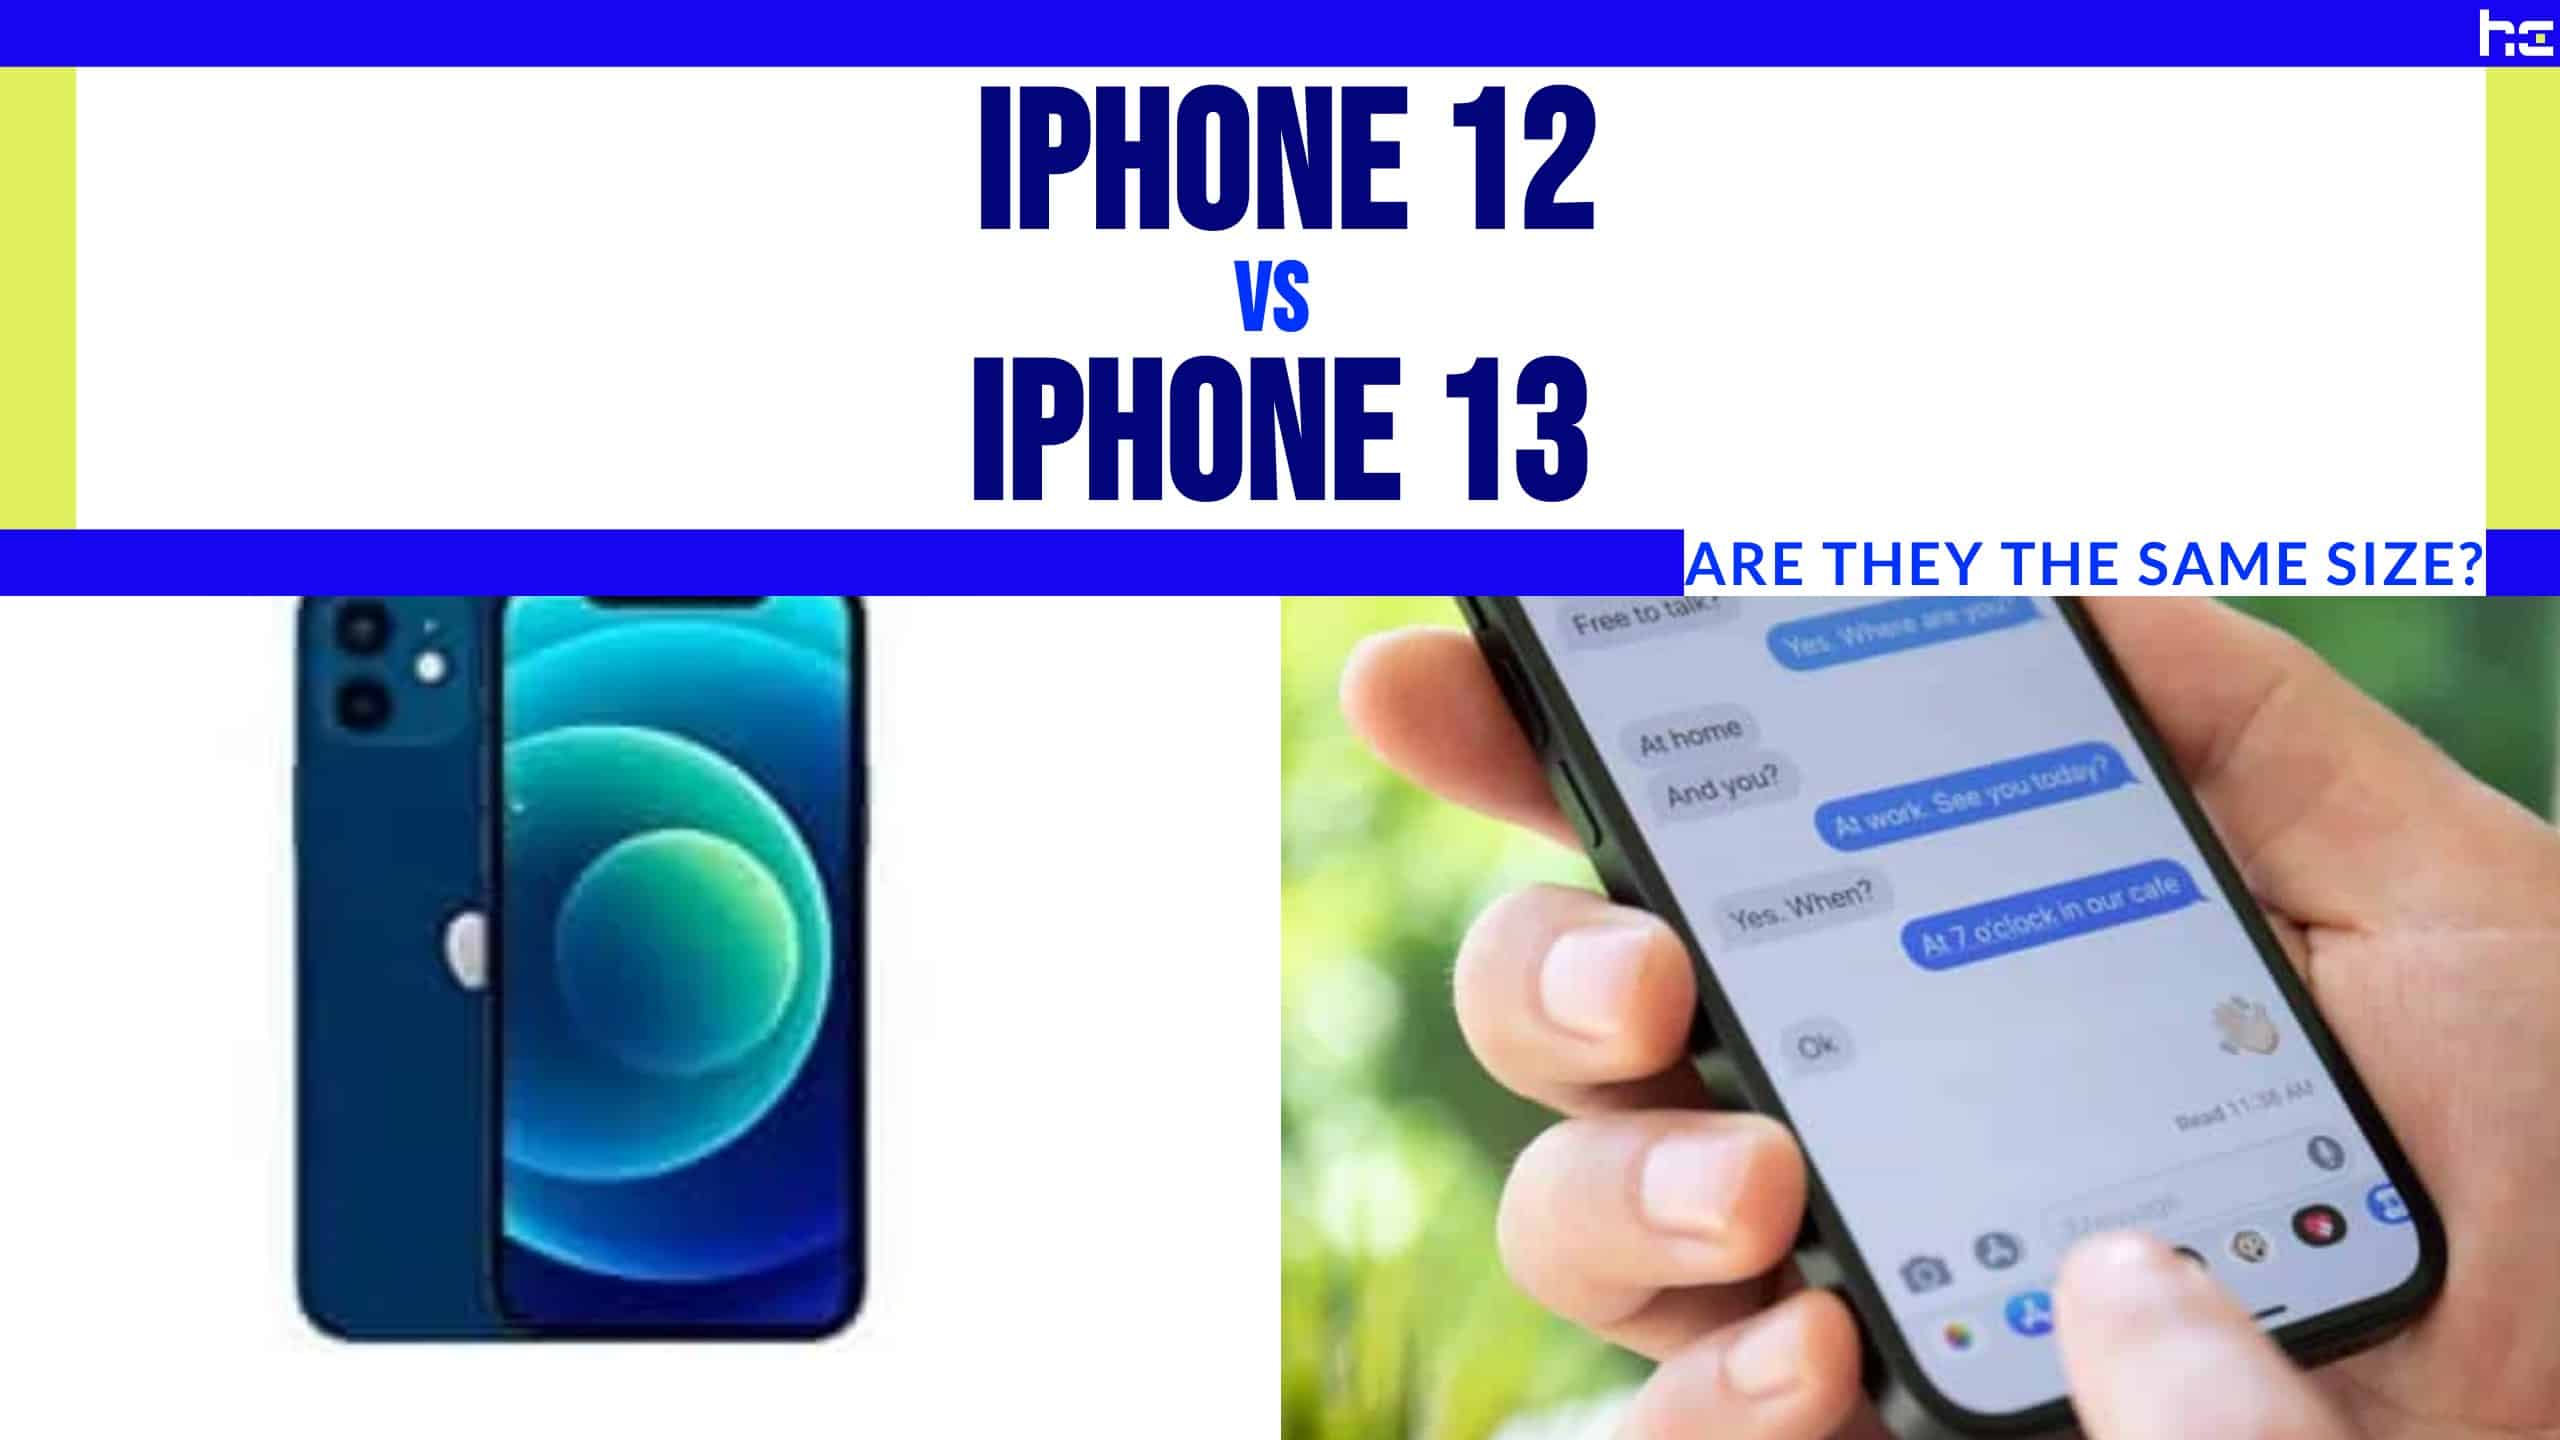 iPhone 12 vs iPhone 13 featured image